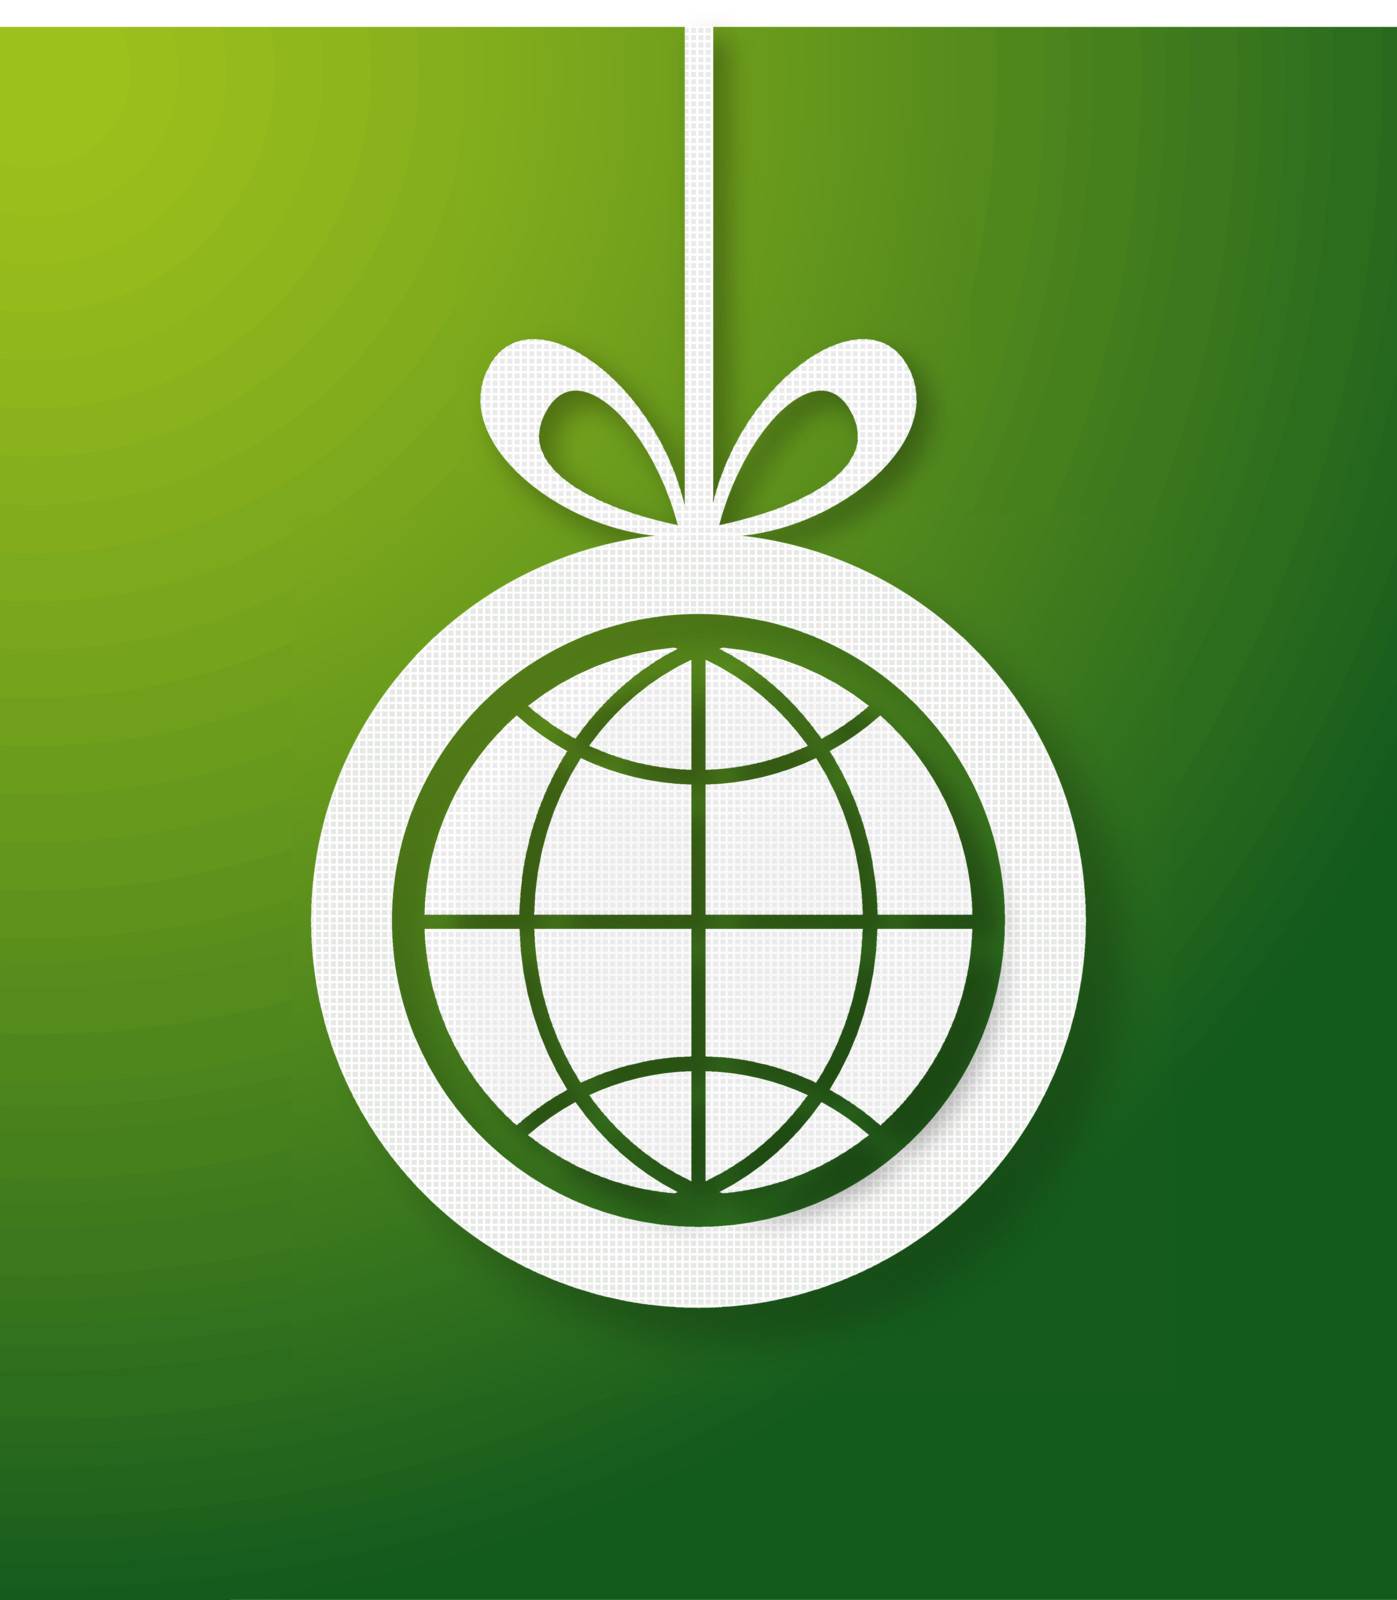 Christmas bauble in green background with world icon. Vector illustration layered for easy manipulation and custom coloring.